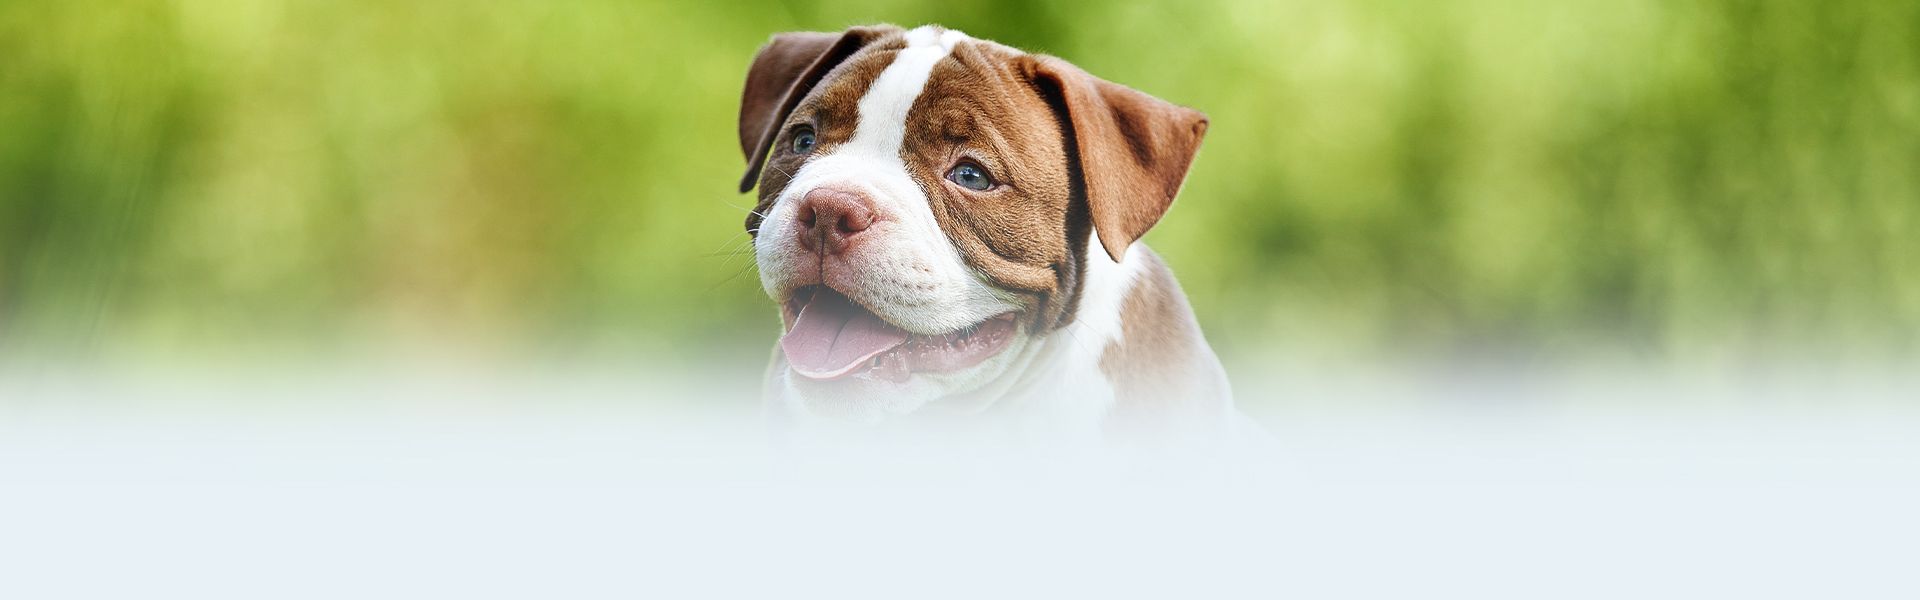 american bully puppy on green grass